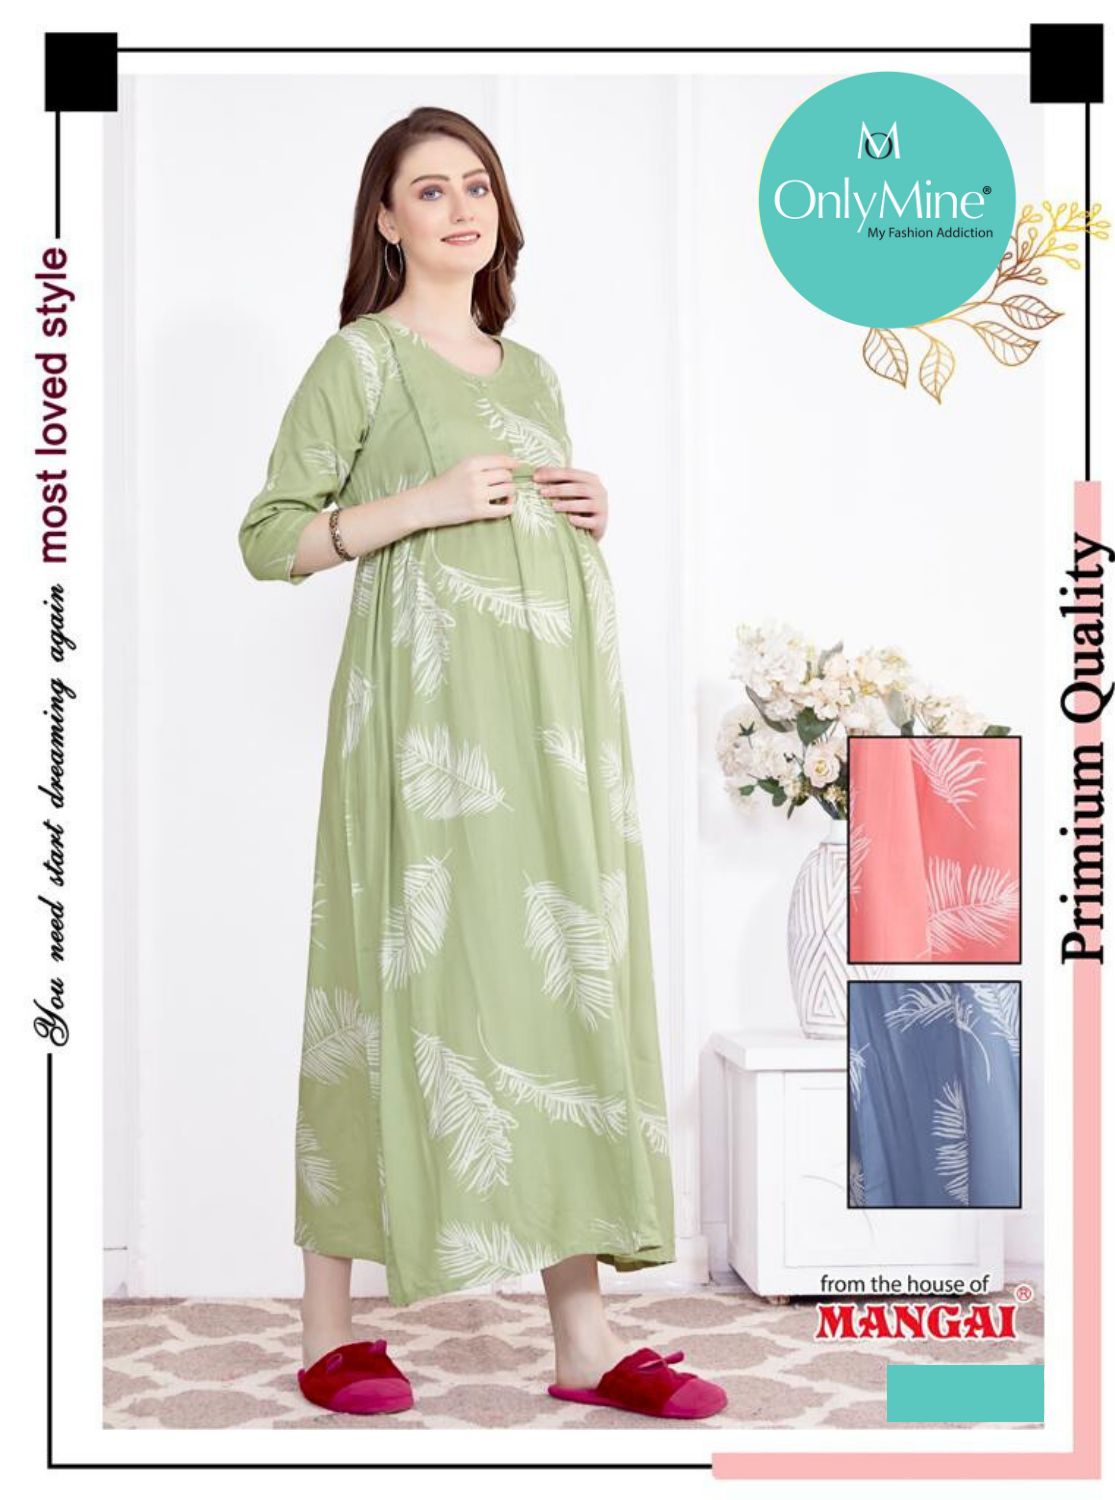 NewArrivalsONLY MINE 4-IN-ONE Mom's Wear - Soft & Smooth Rayon | Maternity | Feeding | Maxi | Long Frock | Casual Wear